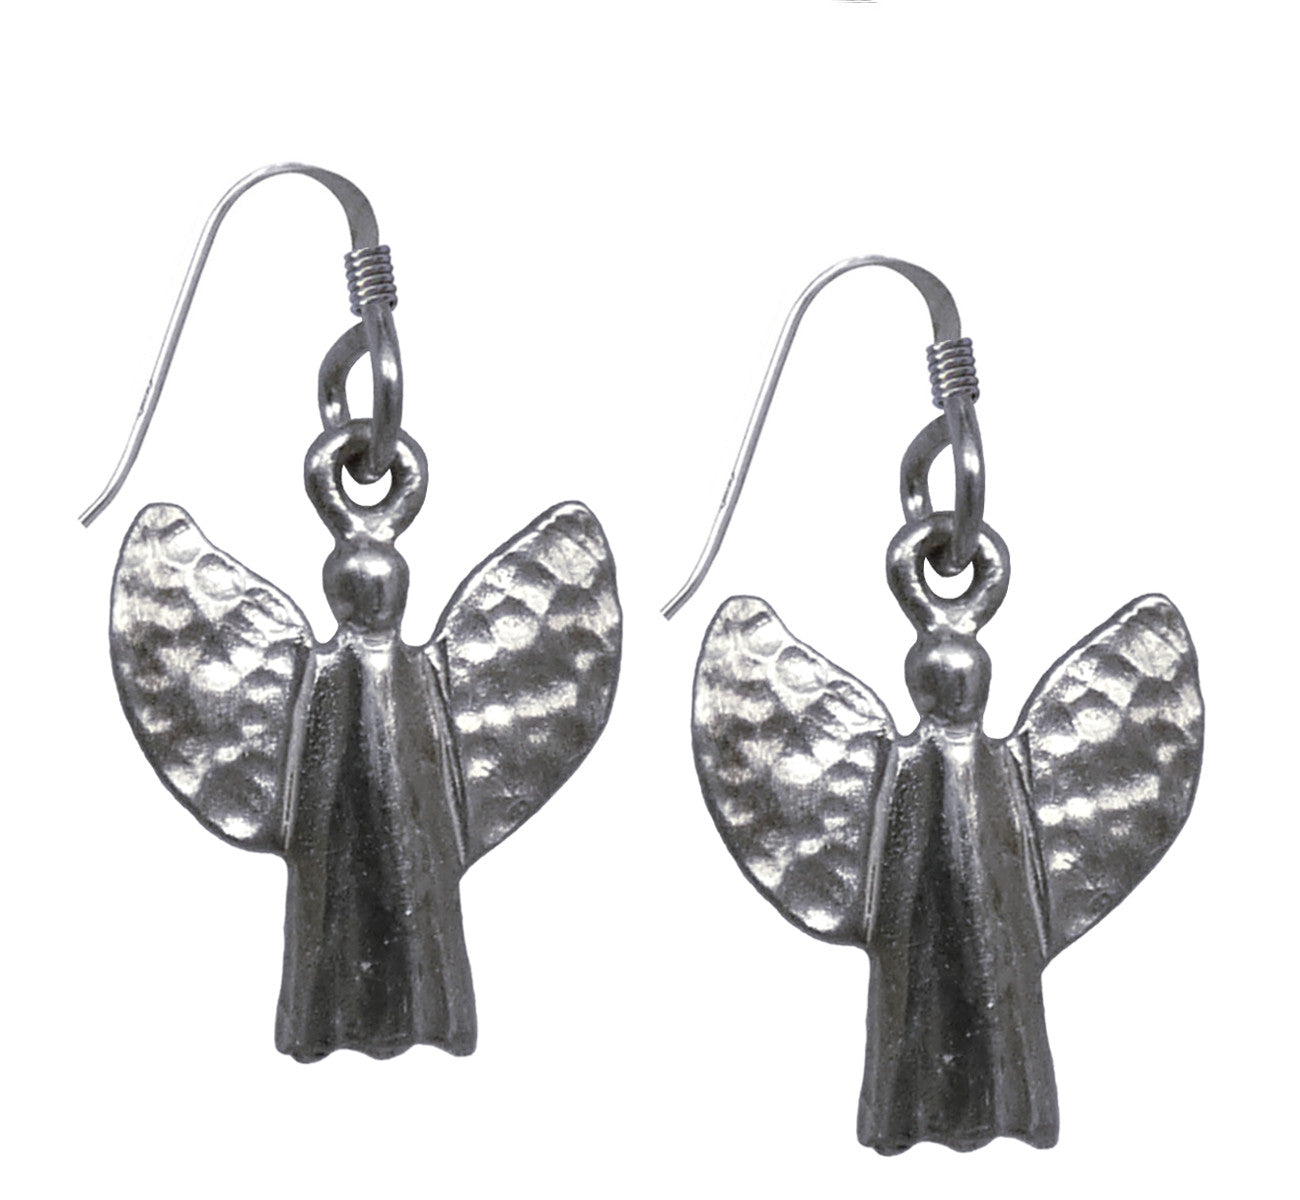 Sterling silver guardian angel hook earrings, 1.3 cm, 0,51”, handmade in Finland. Gives you hope, faith and confidence.